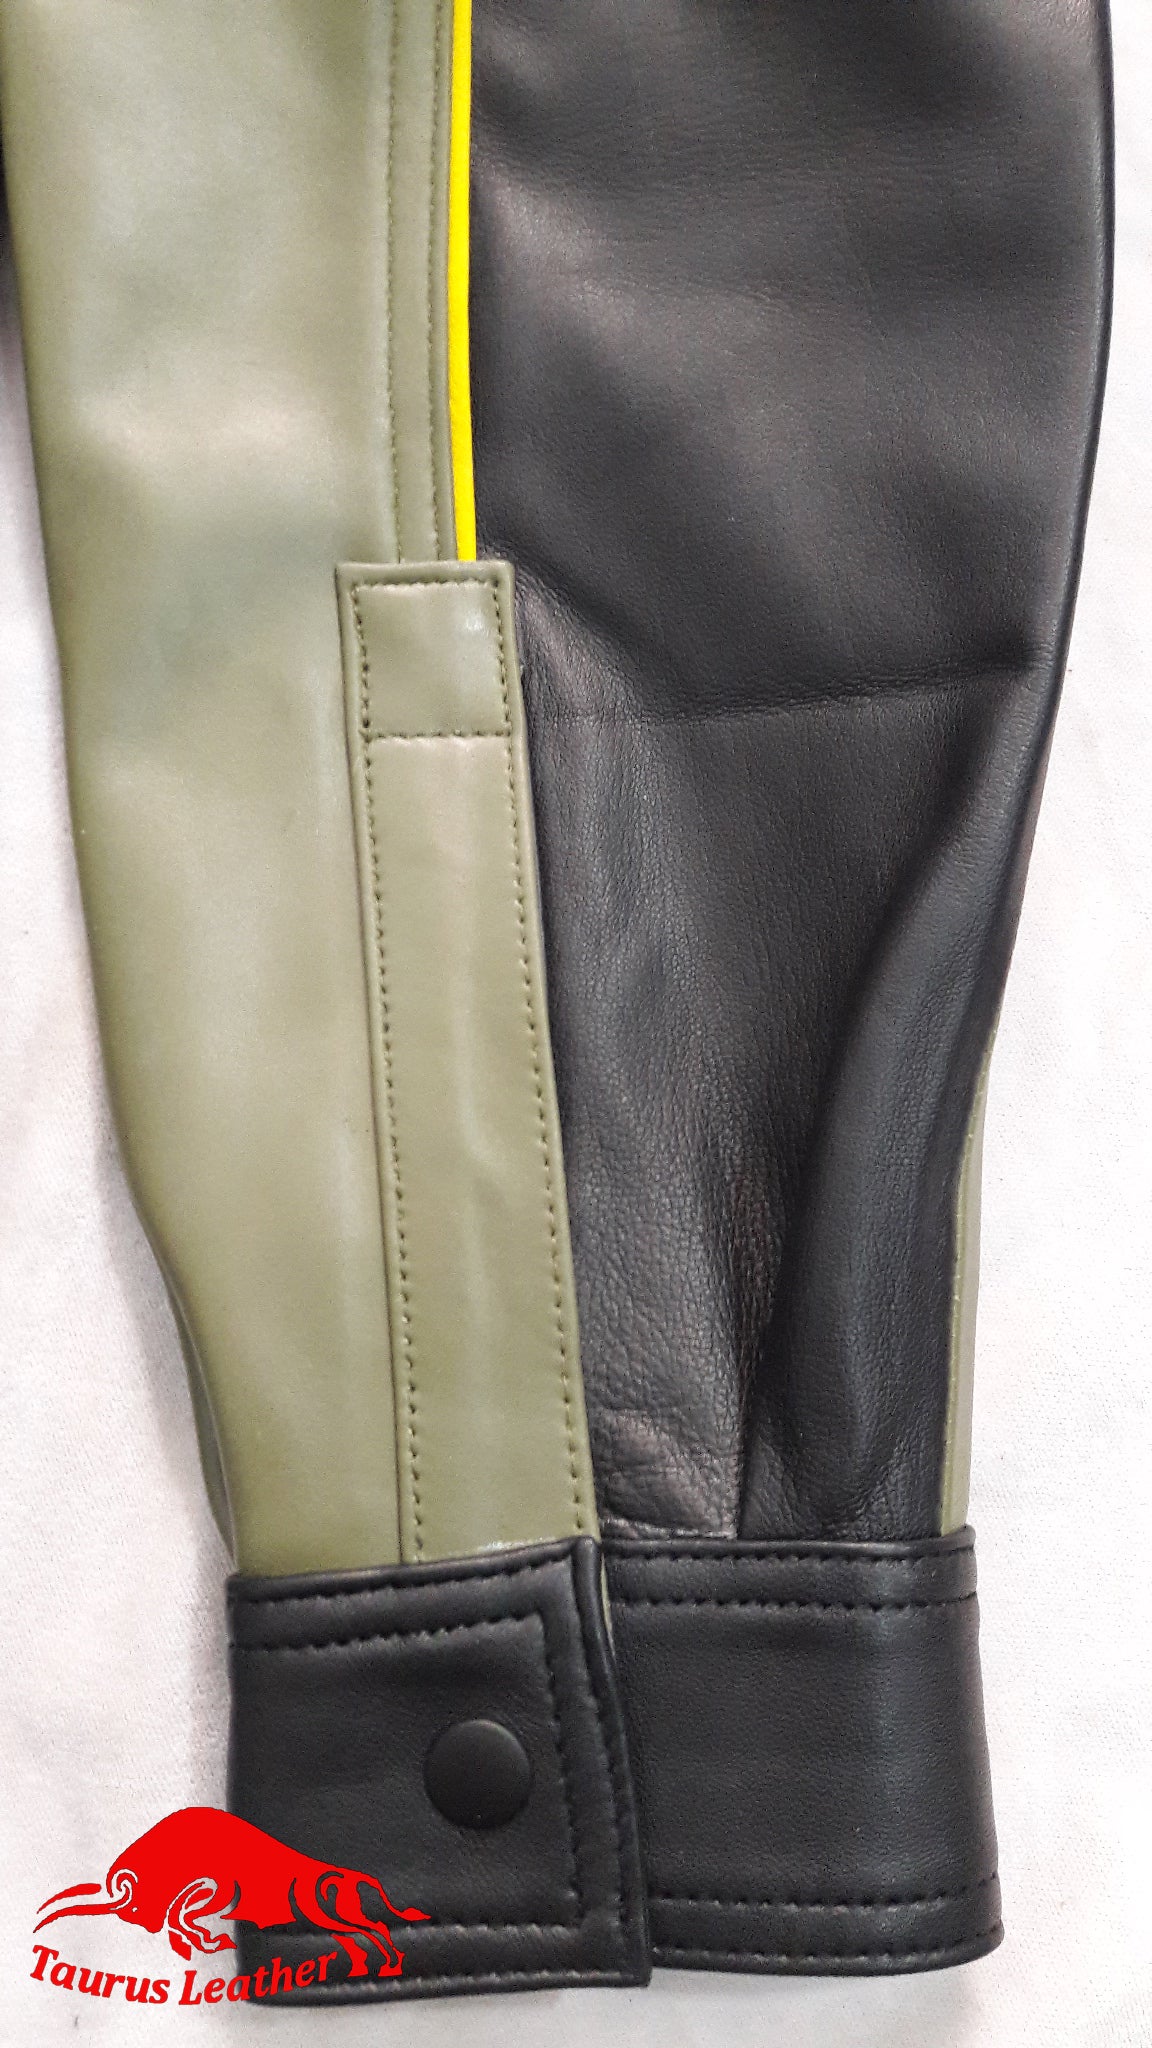 TAURUS LEATHER Sheep Leather Shirt Black And Green With Yellow Trimming